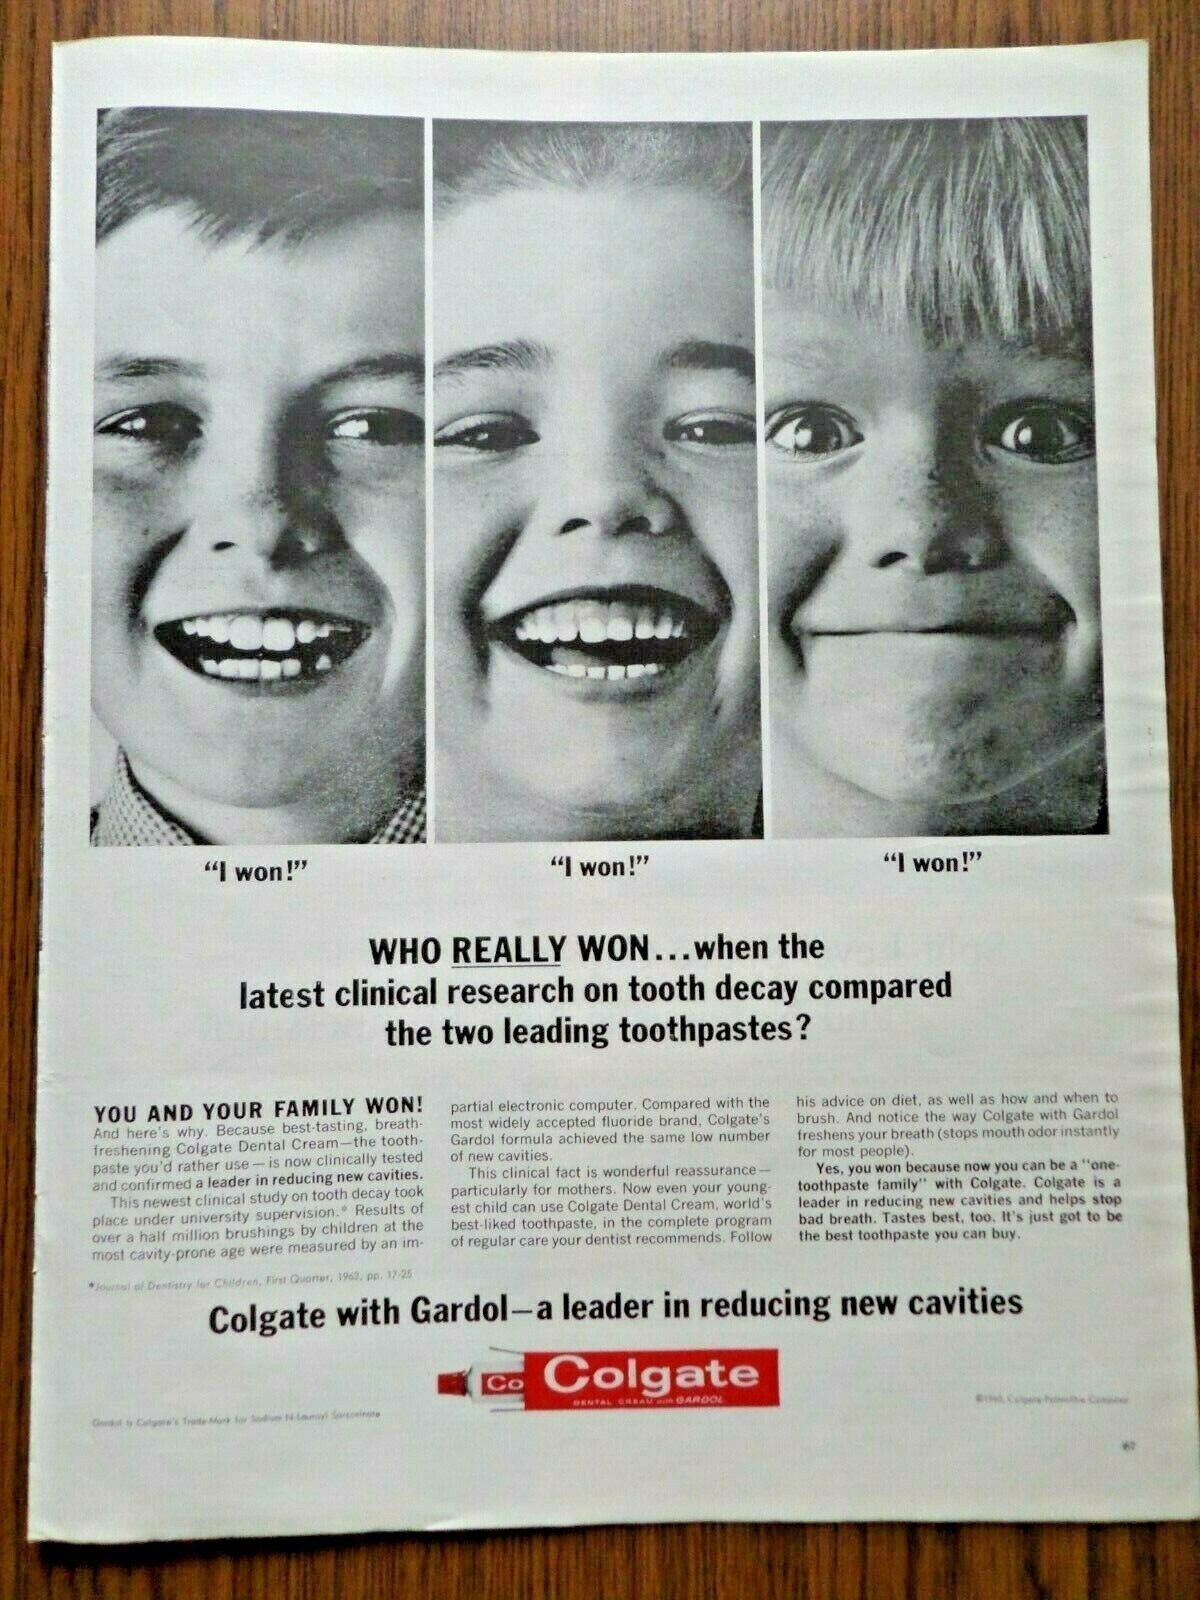 A print ad from Colgate